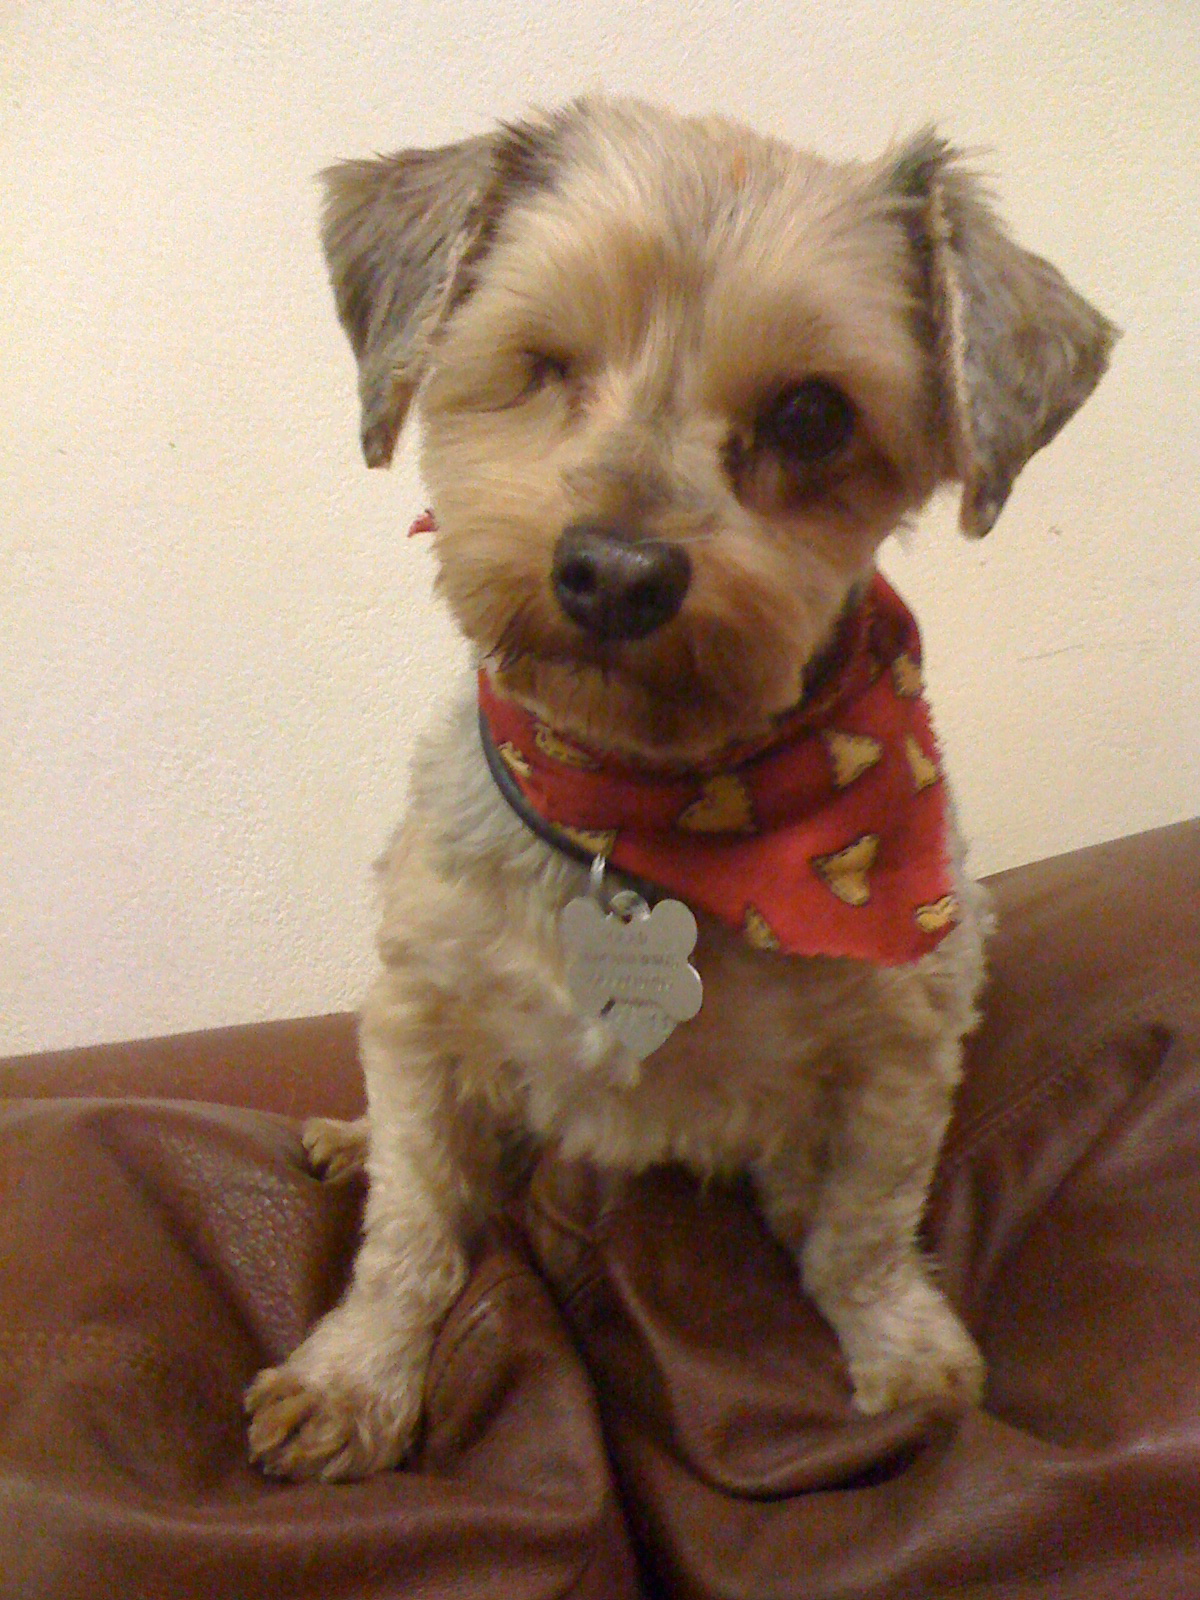 My adorable one-eyed yorkie, Cade